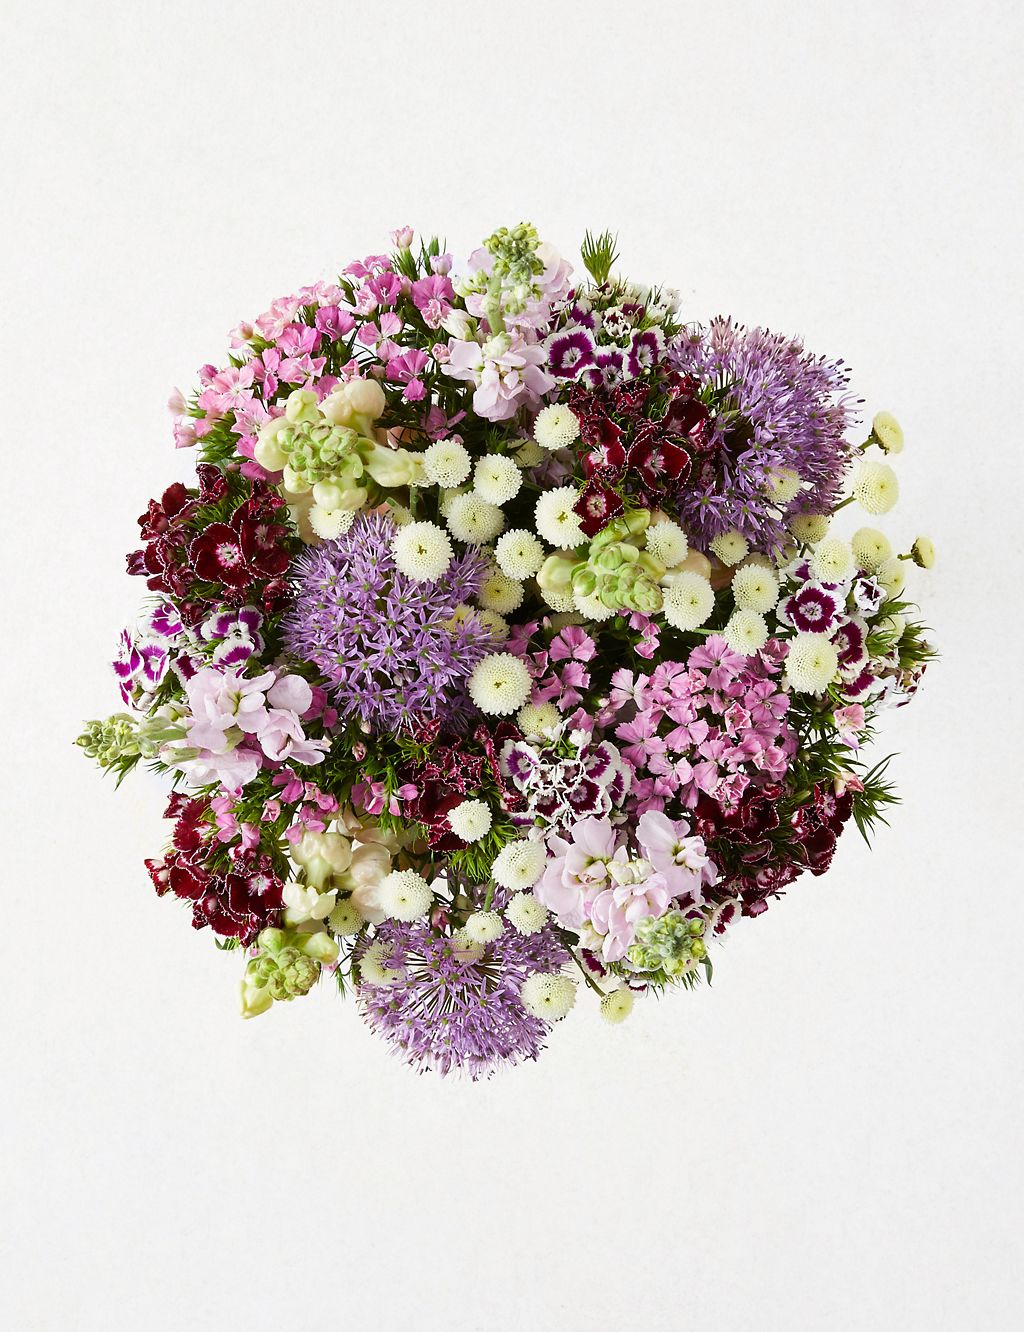 Ready To Arrange May Flowers Bouquet 1 of 6